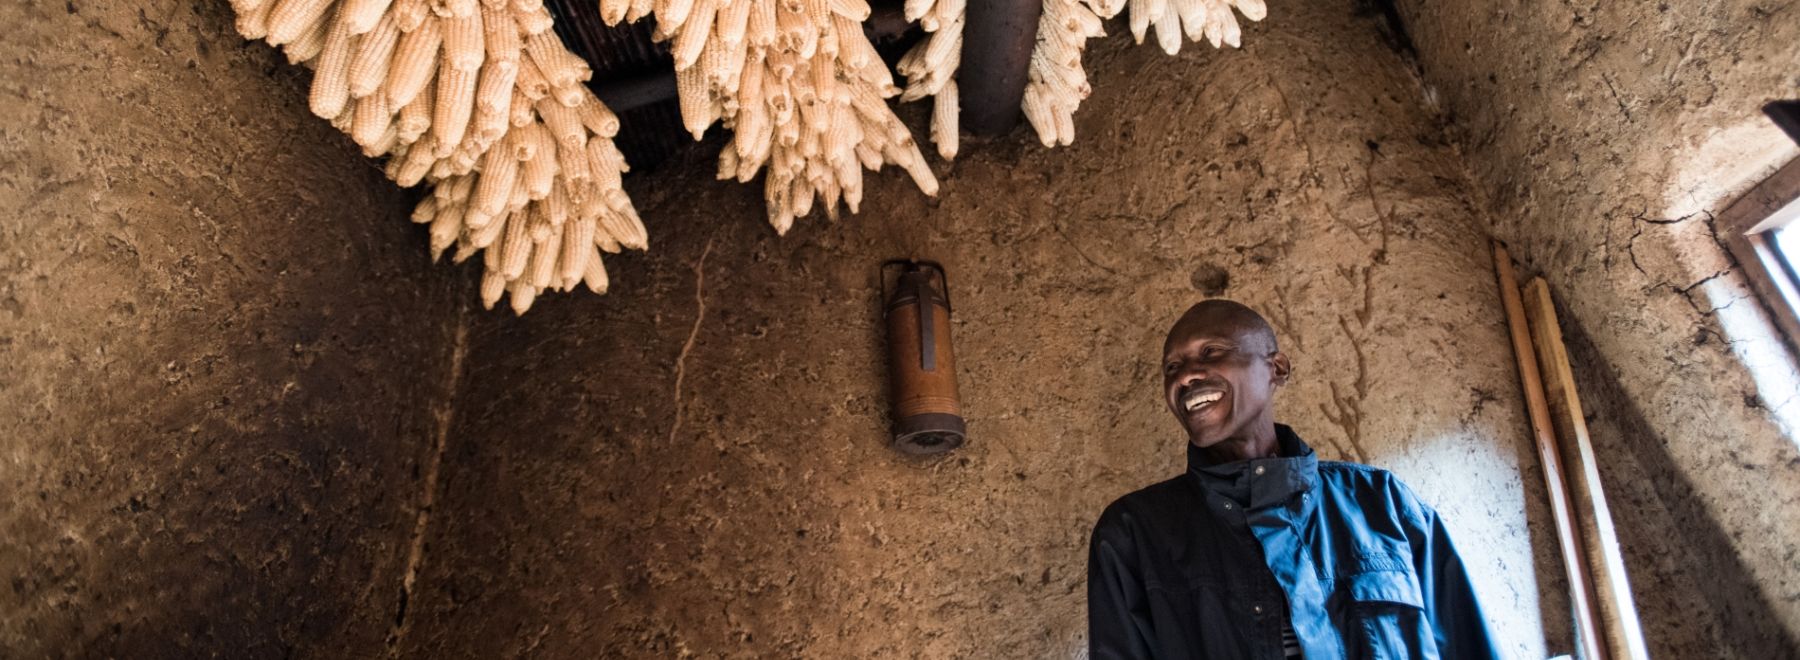 A Rwandan farmer with his maize hanging to dry